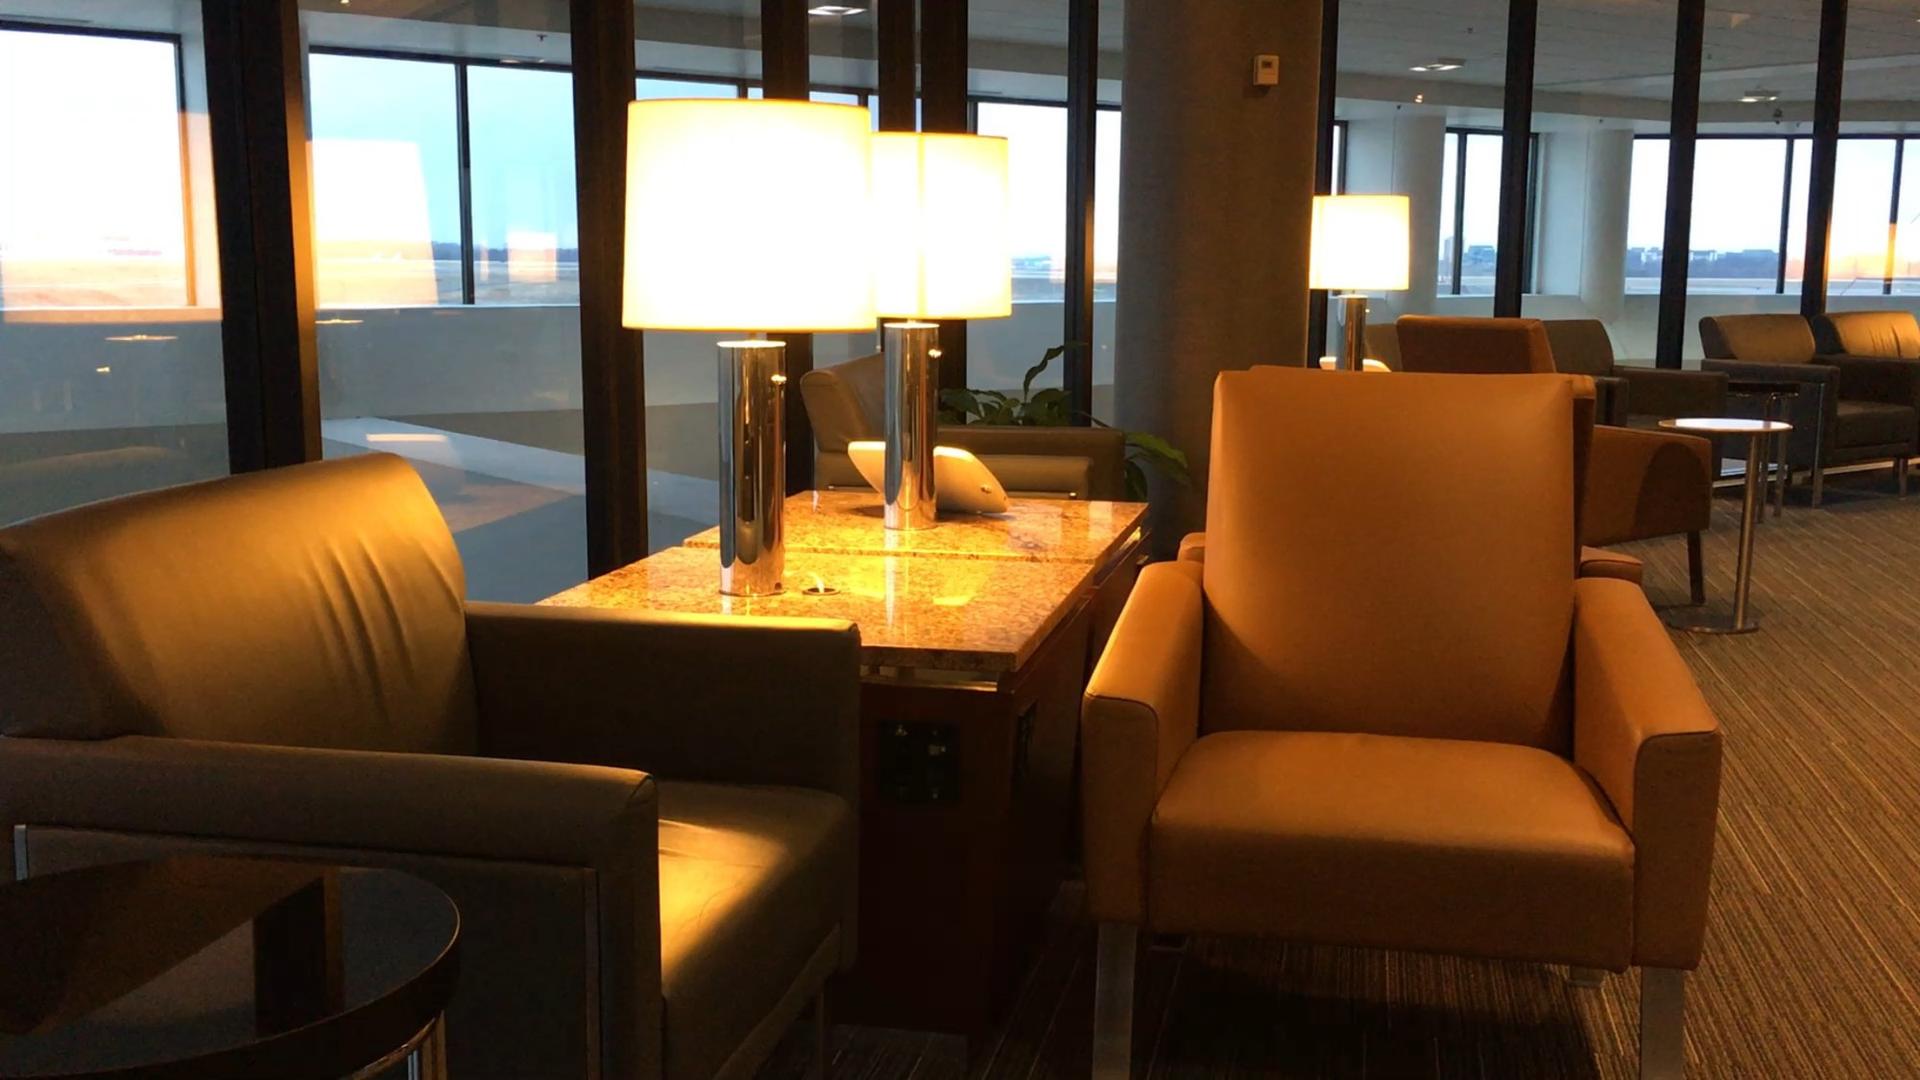 American Airlines Admirals Club image 4 of 16